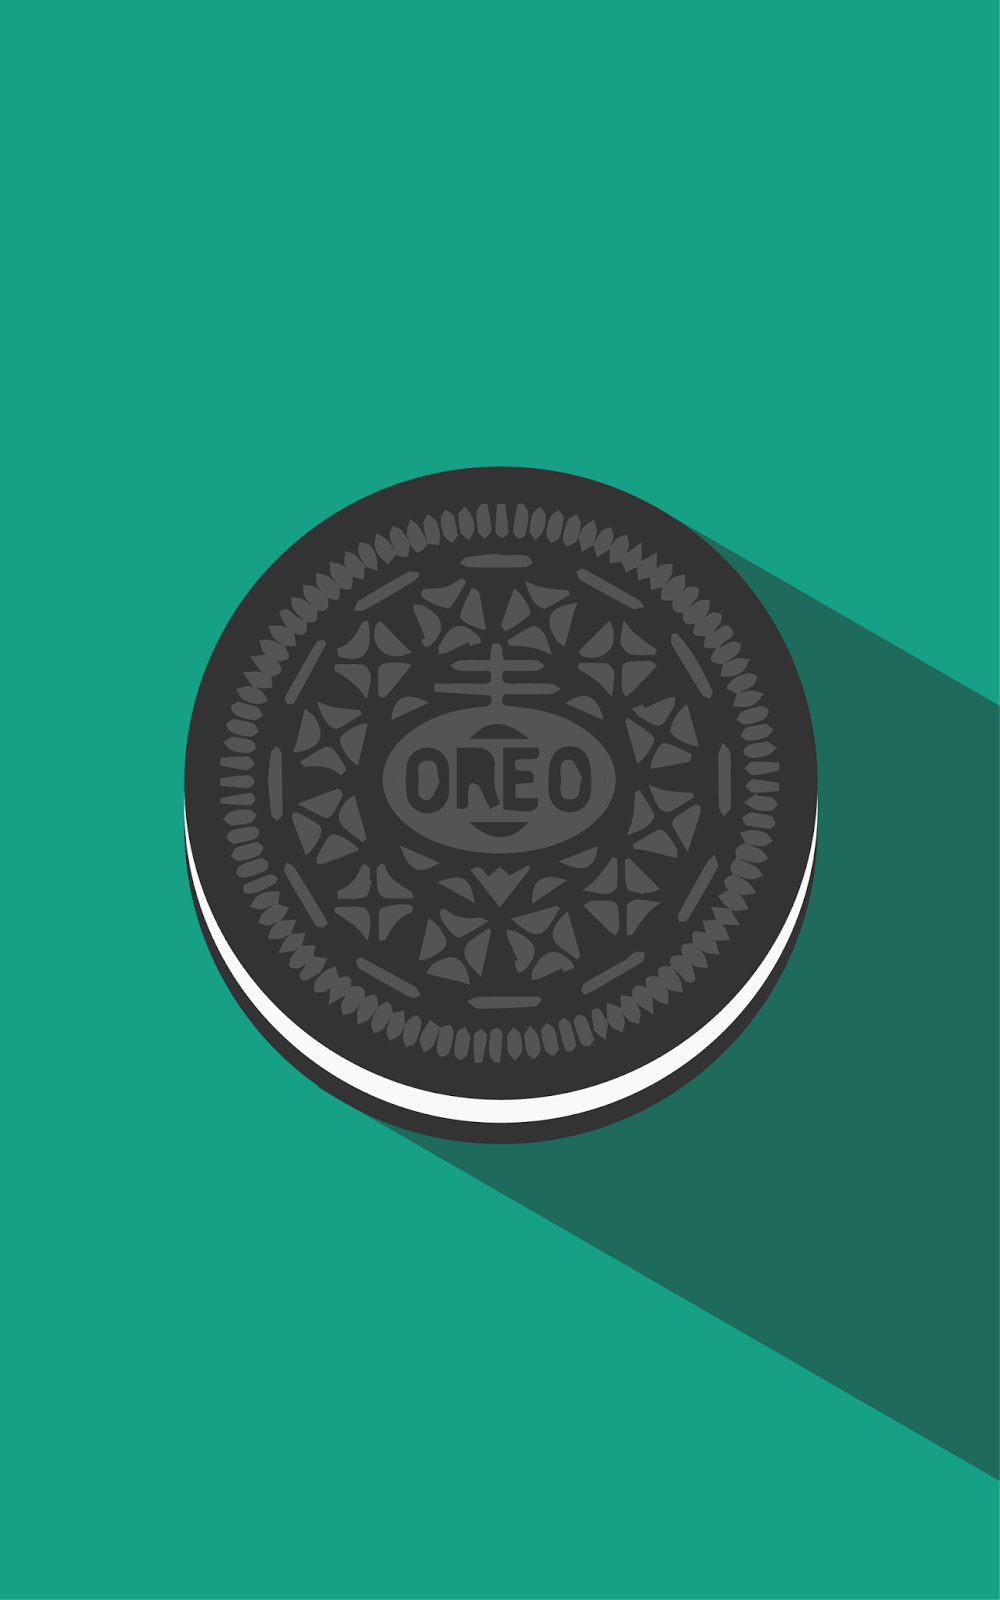 Android Oreo Wallpapers - Wallpaper Cave